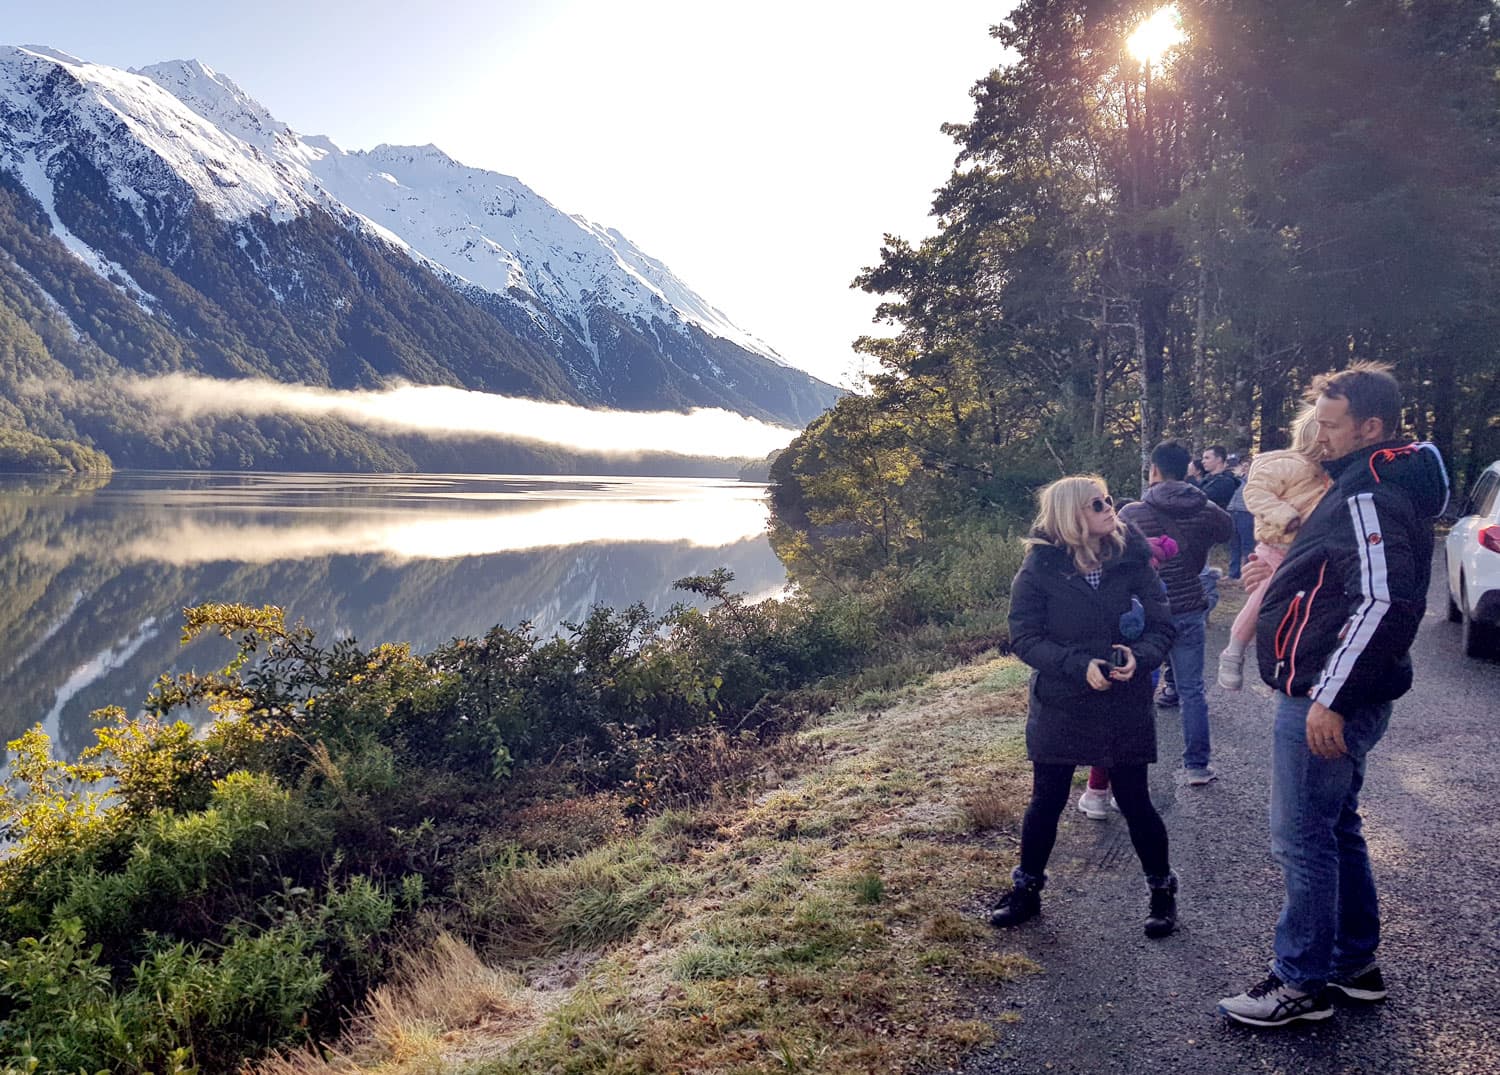 Family group viewing the stunning Lake Te Anau and snow-capped mountains